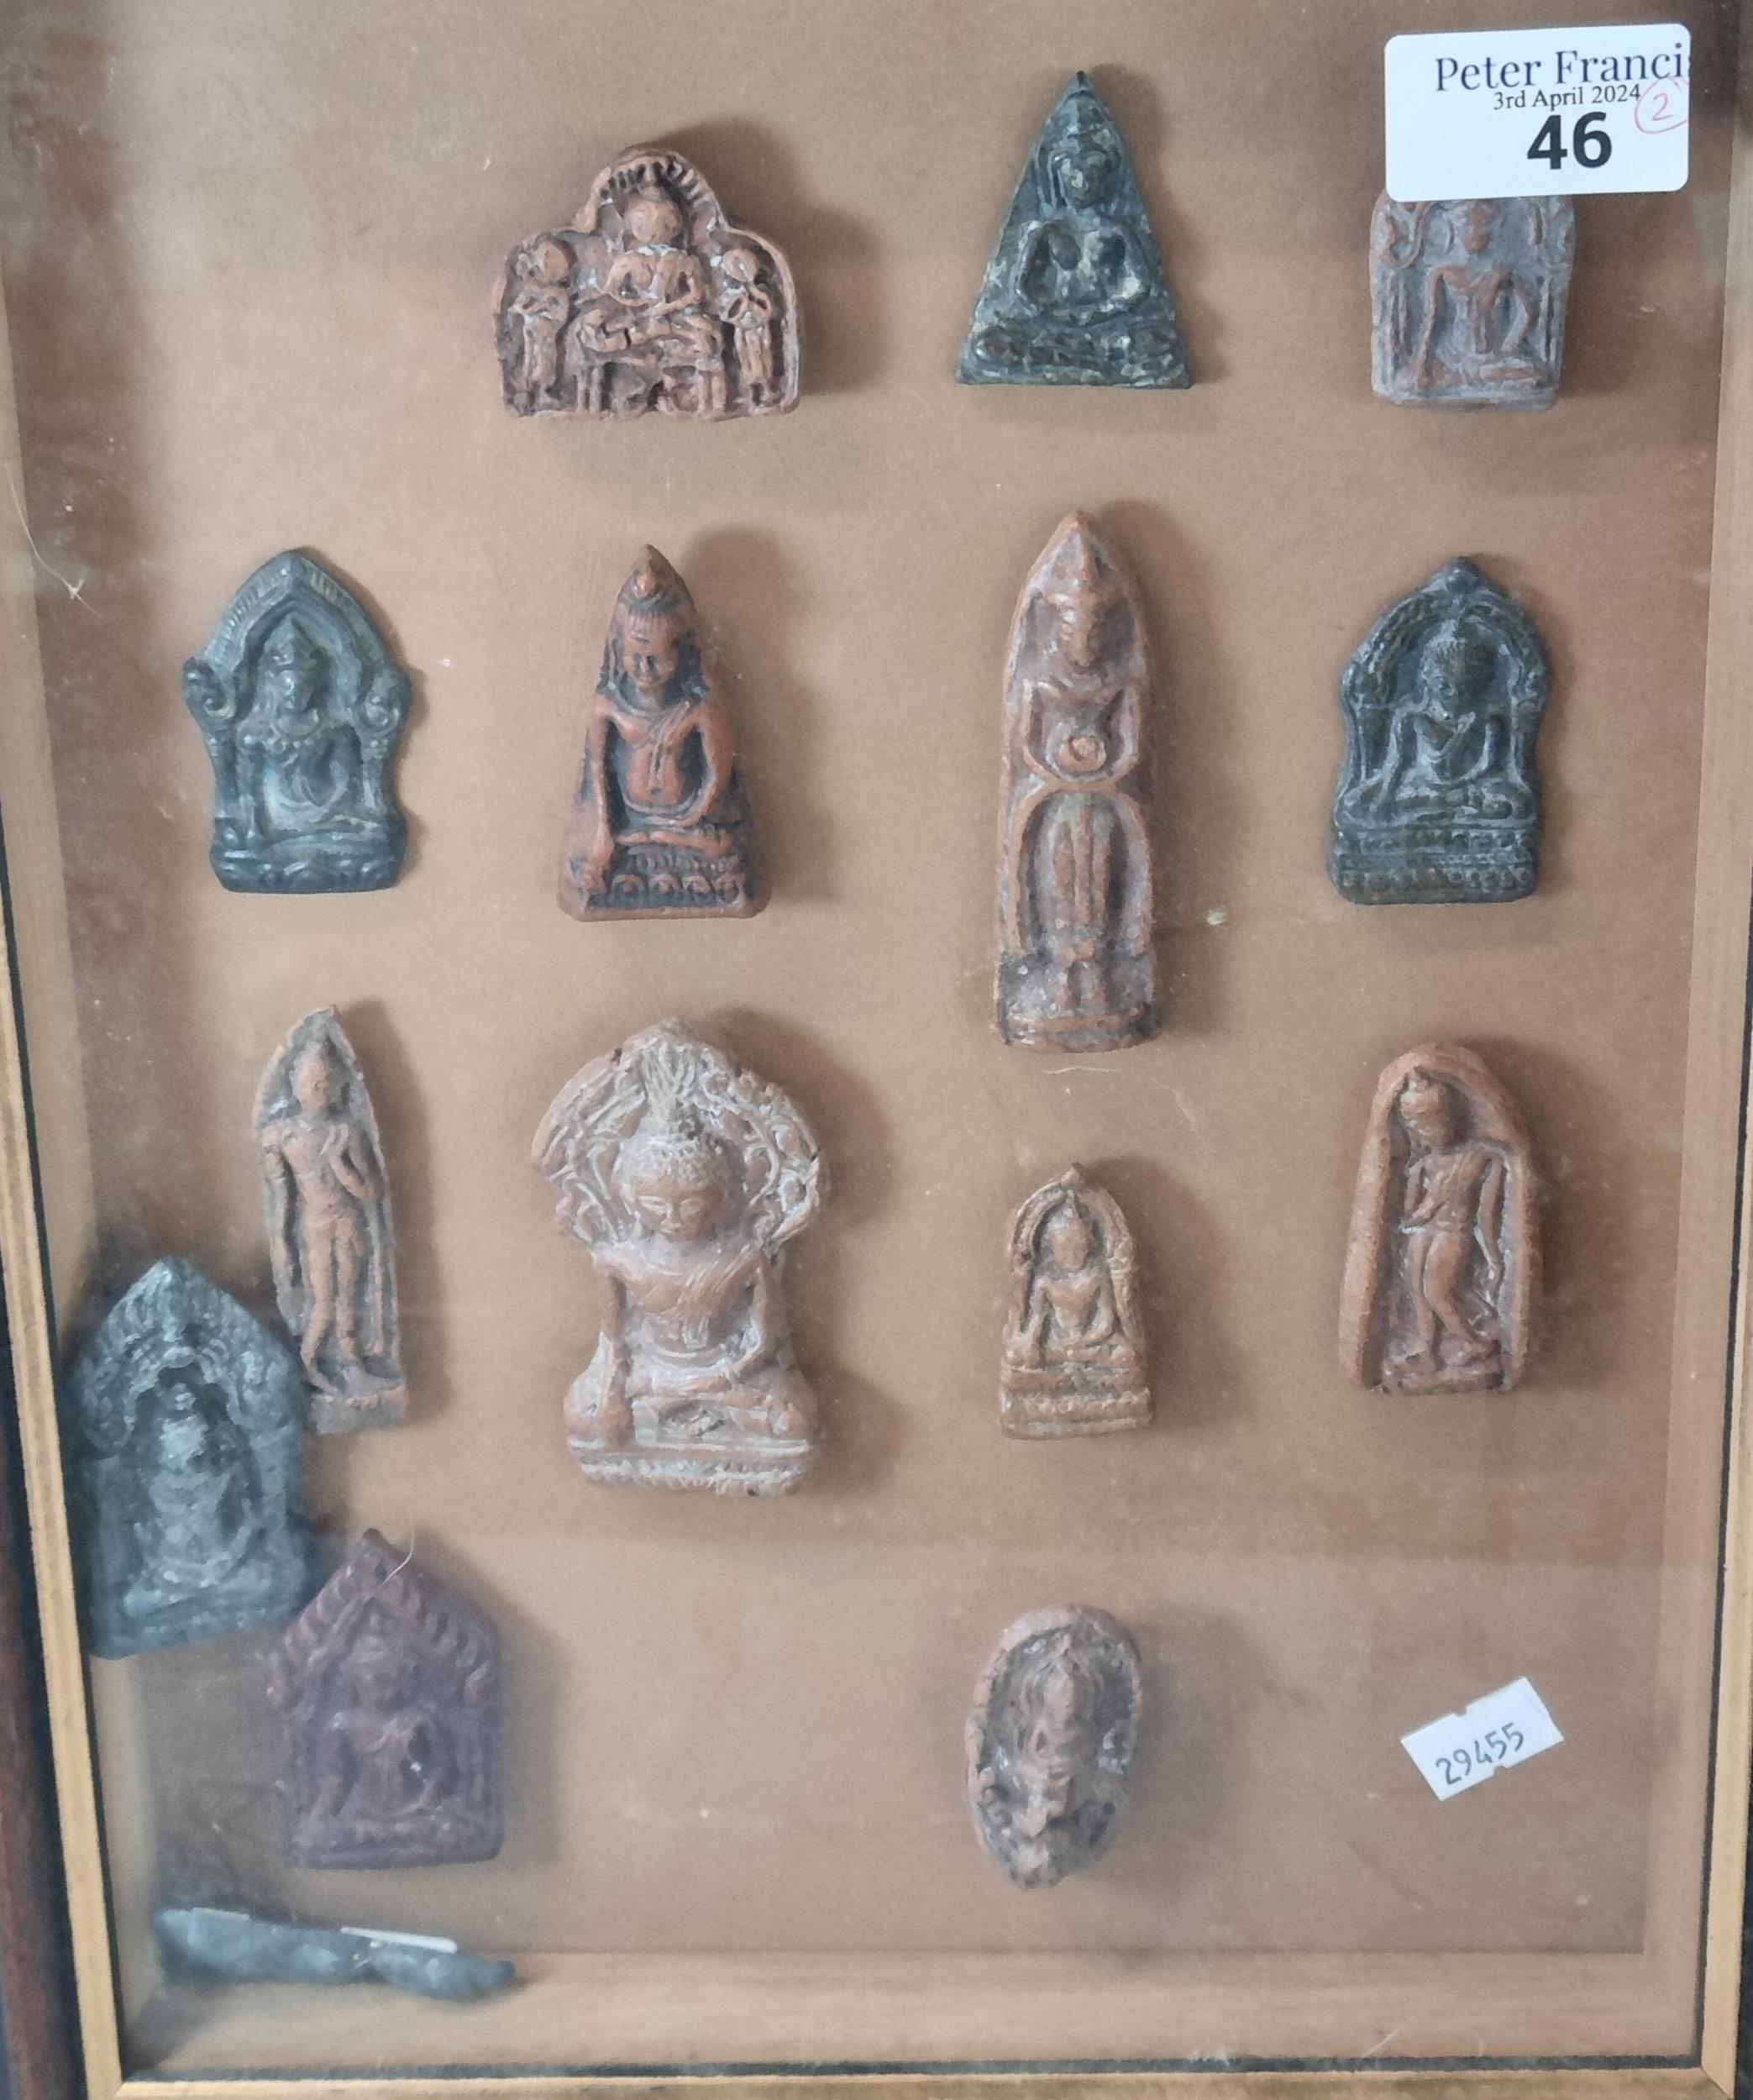 Group of appearing carved devotional figures mounted in a wooden glass fronted display frame - Image 2 of 3